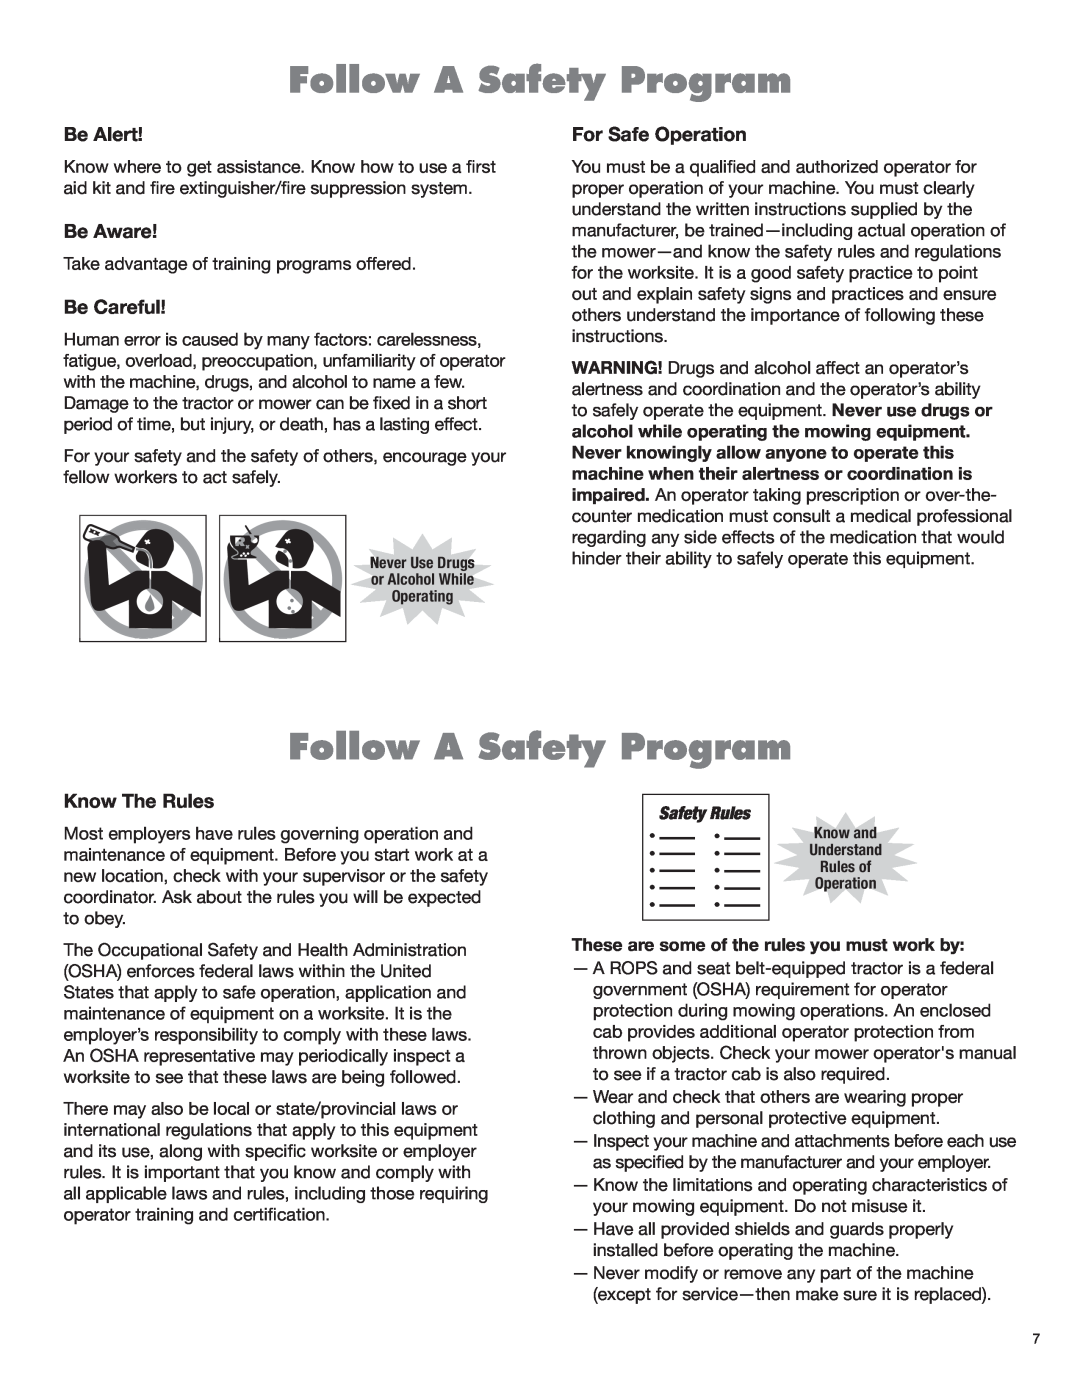 Servis-Rhino 2160 manual Follow A Safety Program, Be Alert, Be Aware, Be Careful, For Safe Operation, Know The Rules 